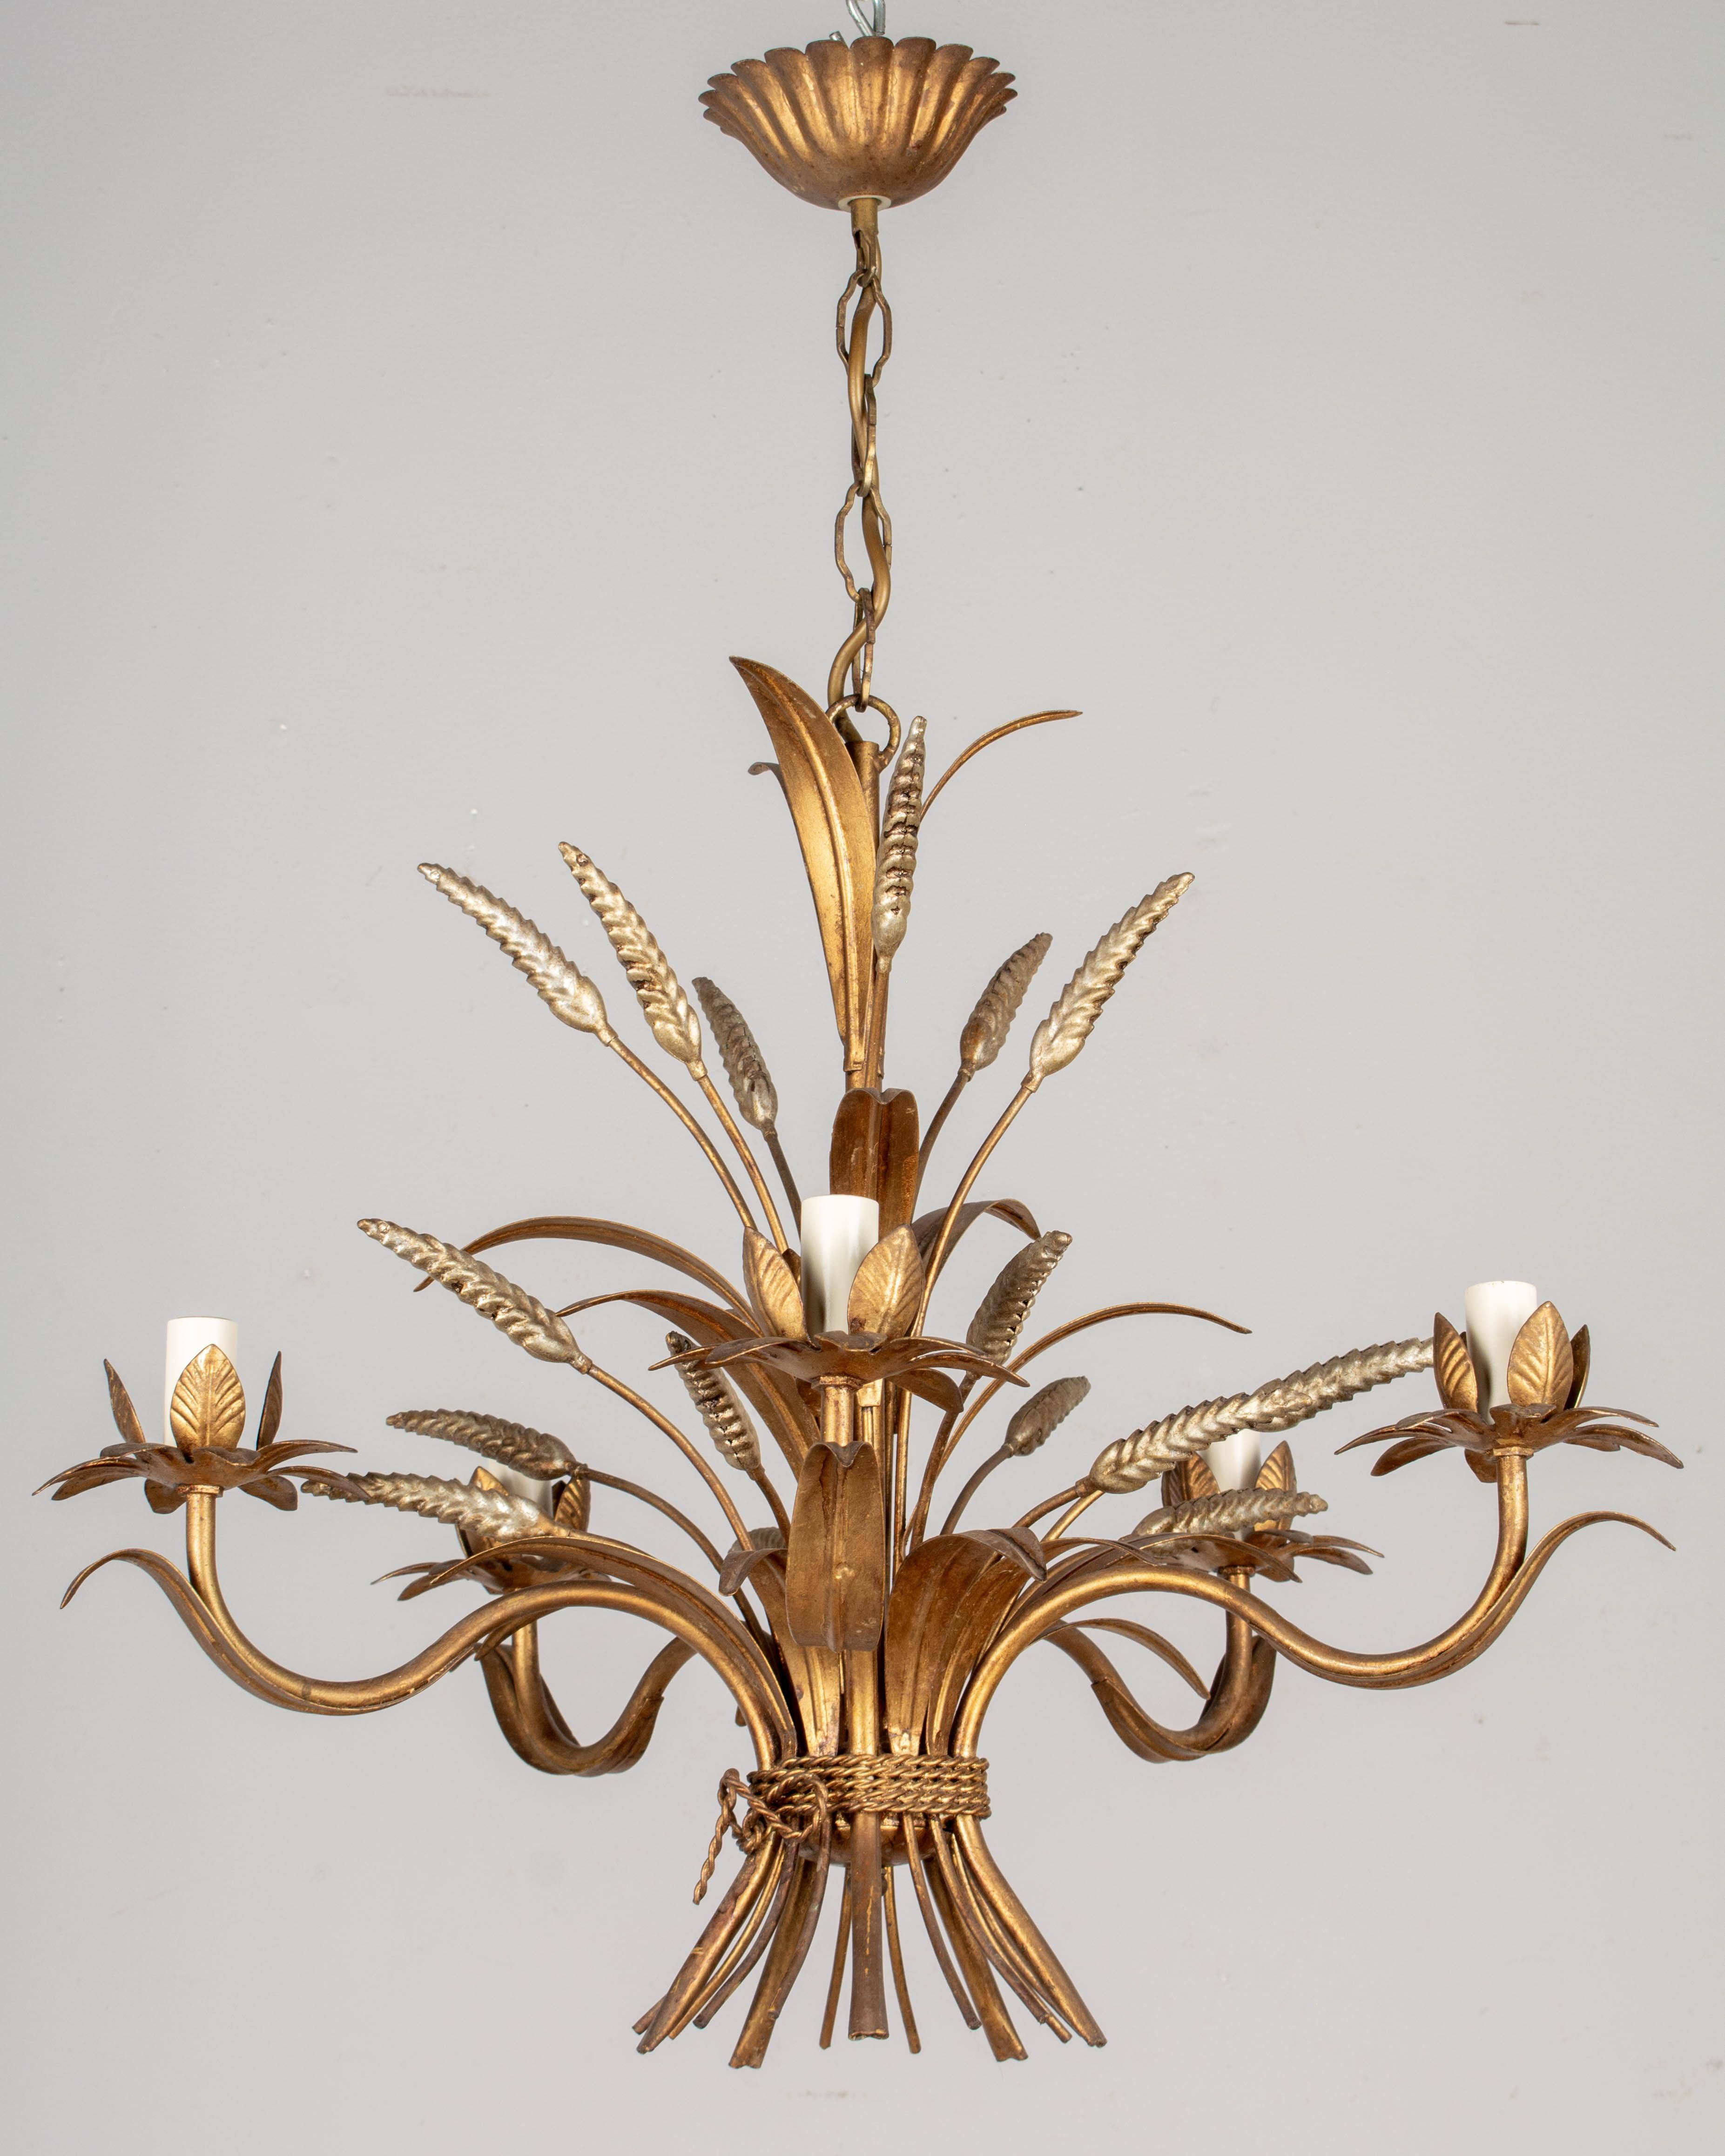 A Hollywood Regency style five-light gilt metal chandelier with silver sheaf of wheat. Designed by Hans Kögl and made in Italy. New sockets and candle covers. In working order. Good original vintage condition with minor wear consistent with age and